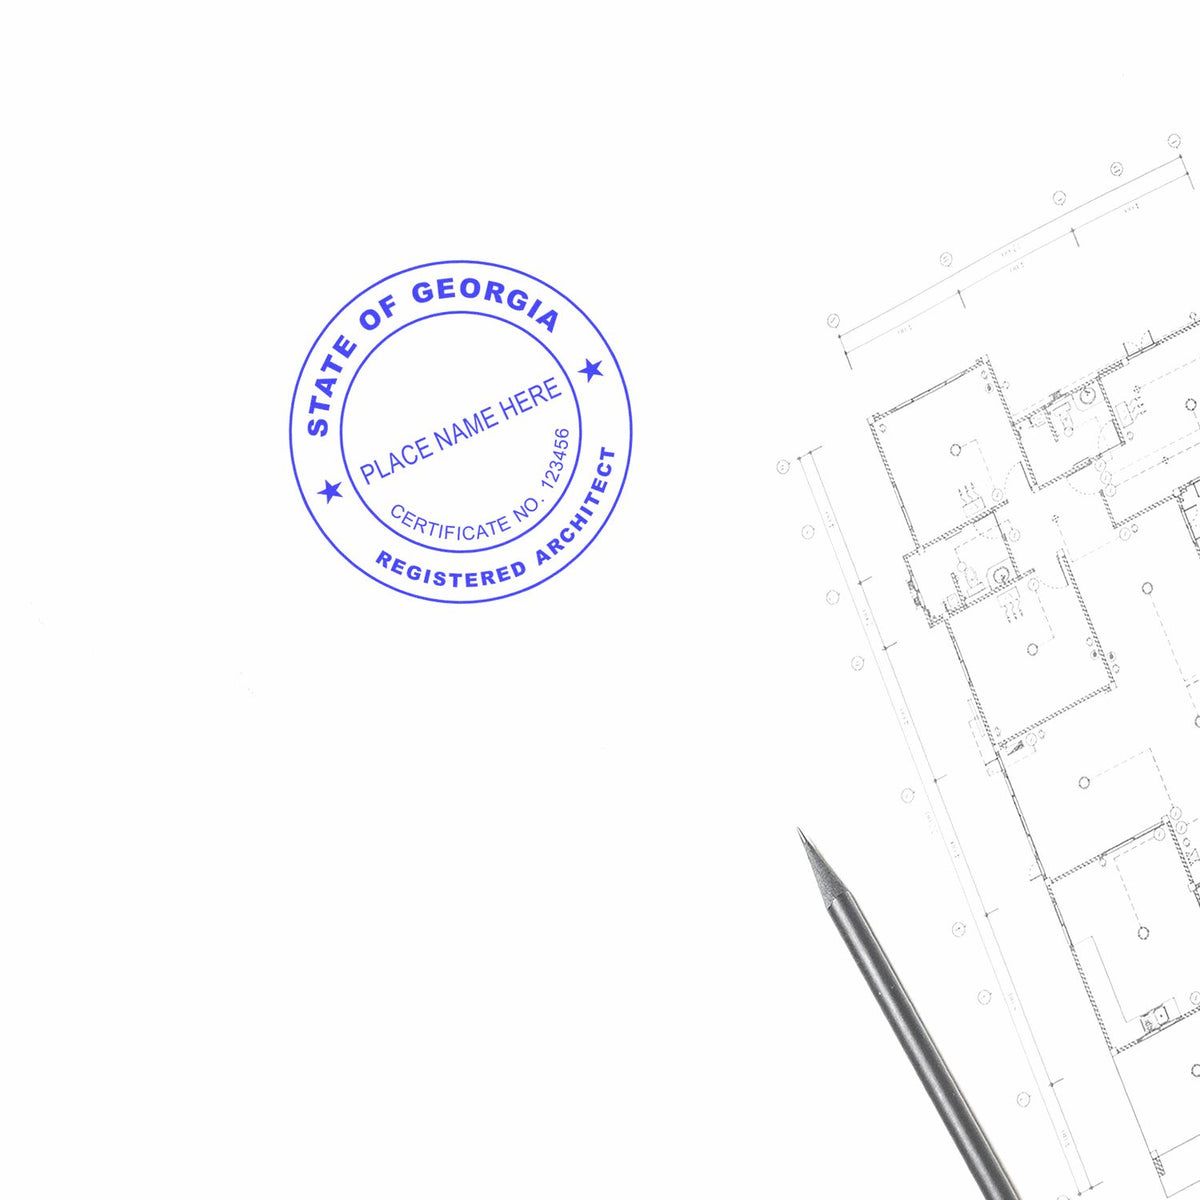 A photograph of the Slim Pre-Inked Georgia Architect Seal Stamp stamp impression reveals a vivid, professional image of the on paper.